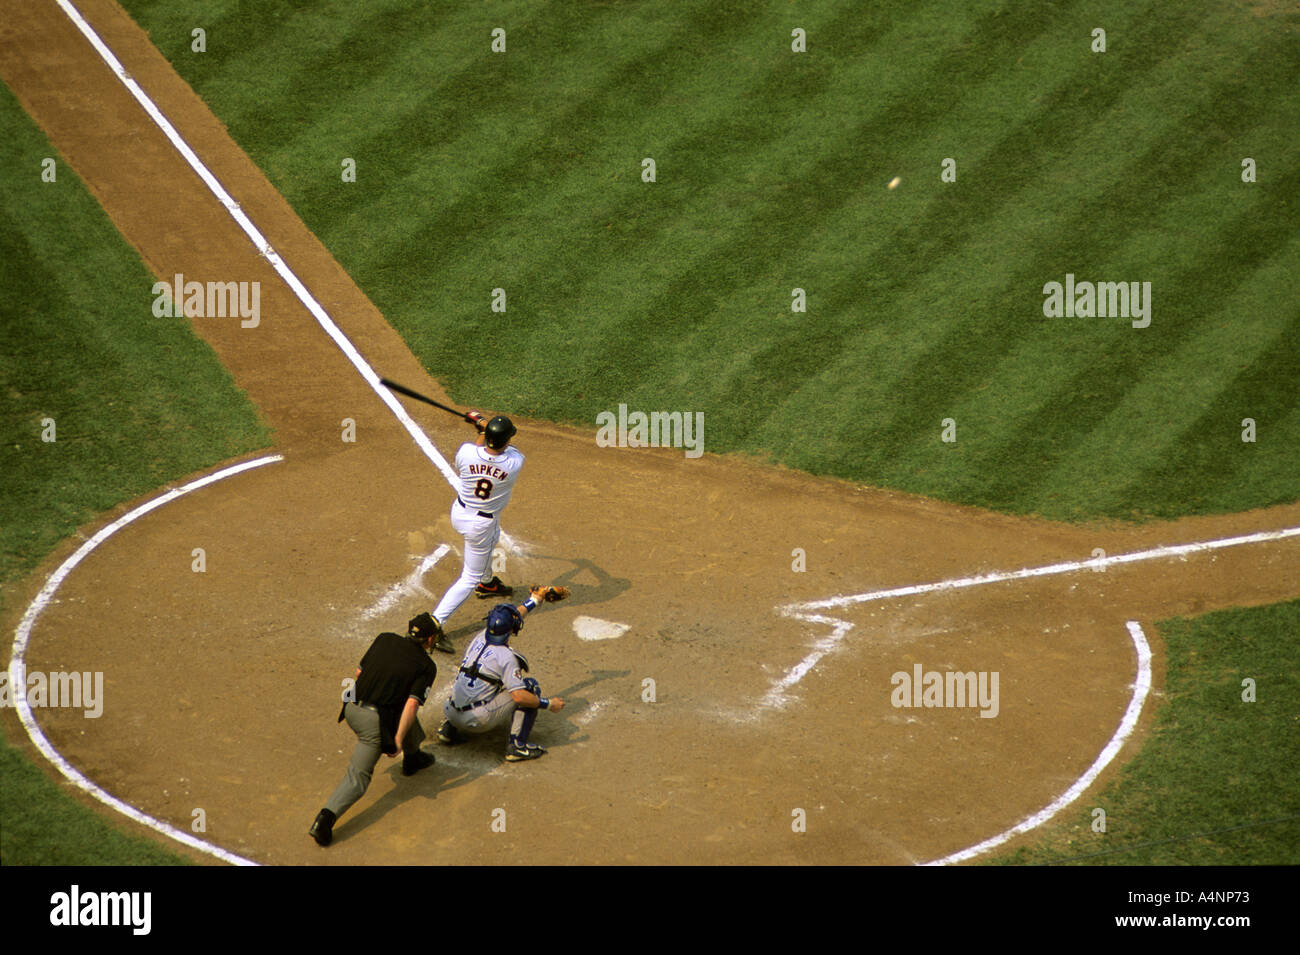 Iron Man Cal Ripken of the Baltimore Orioles hits the ball during his last season in august 2001 Stock Photo